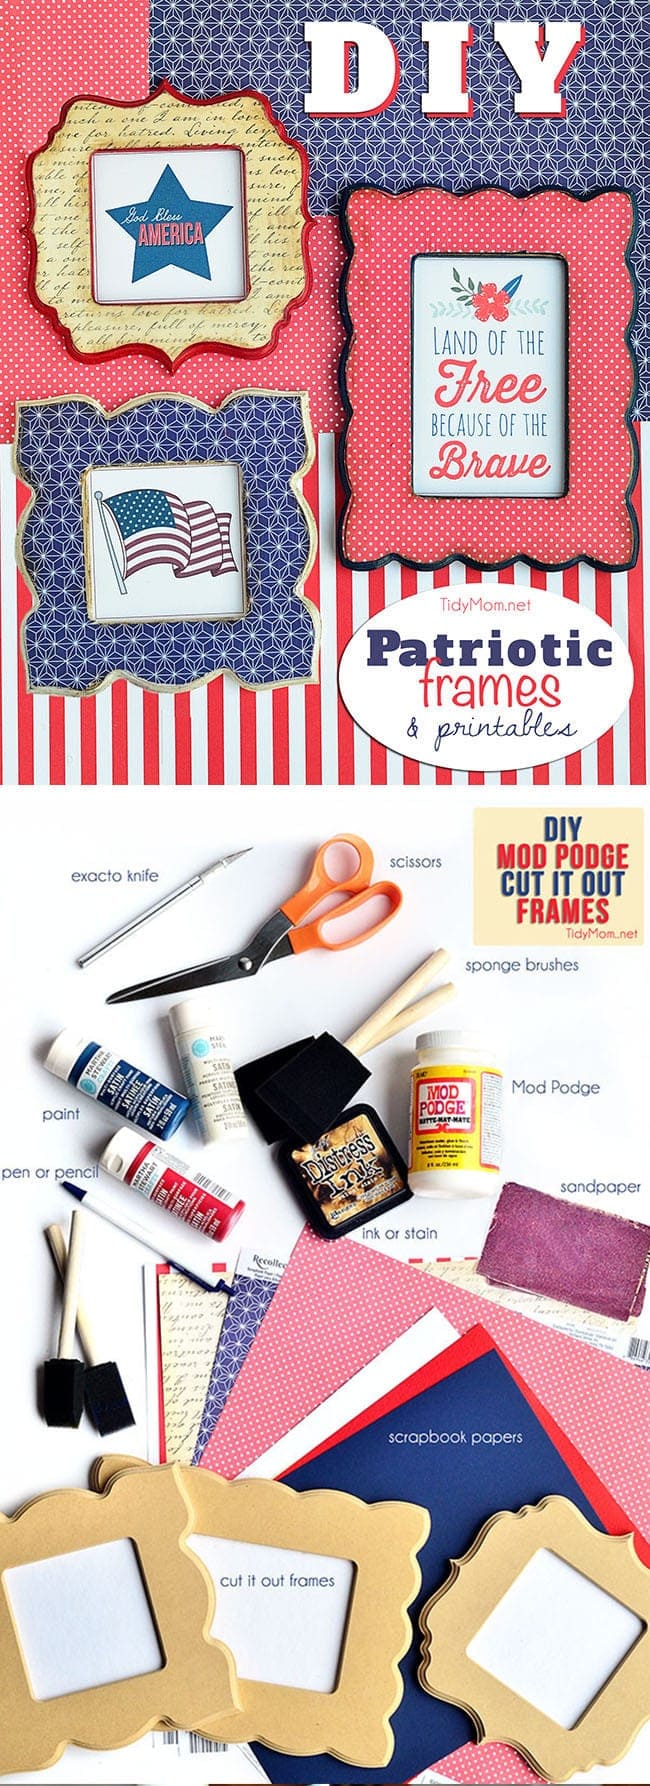 Make these fun patriotic frames with scrapbook paper, Mod Podge and unfinished wood frames. DIY Patriotic Frames Tutorial + FREE PATRIOTIC PRINTABLES to download at TidyMom.net